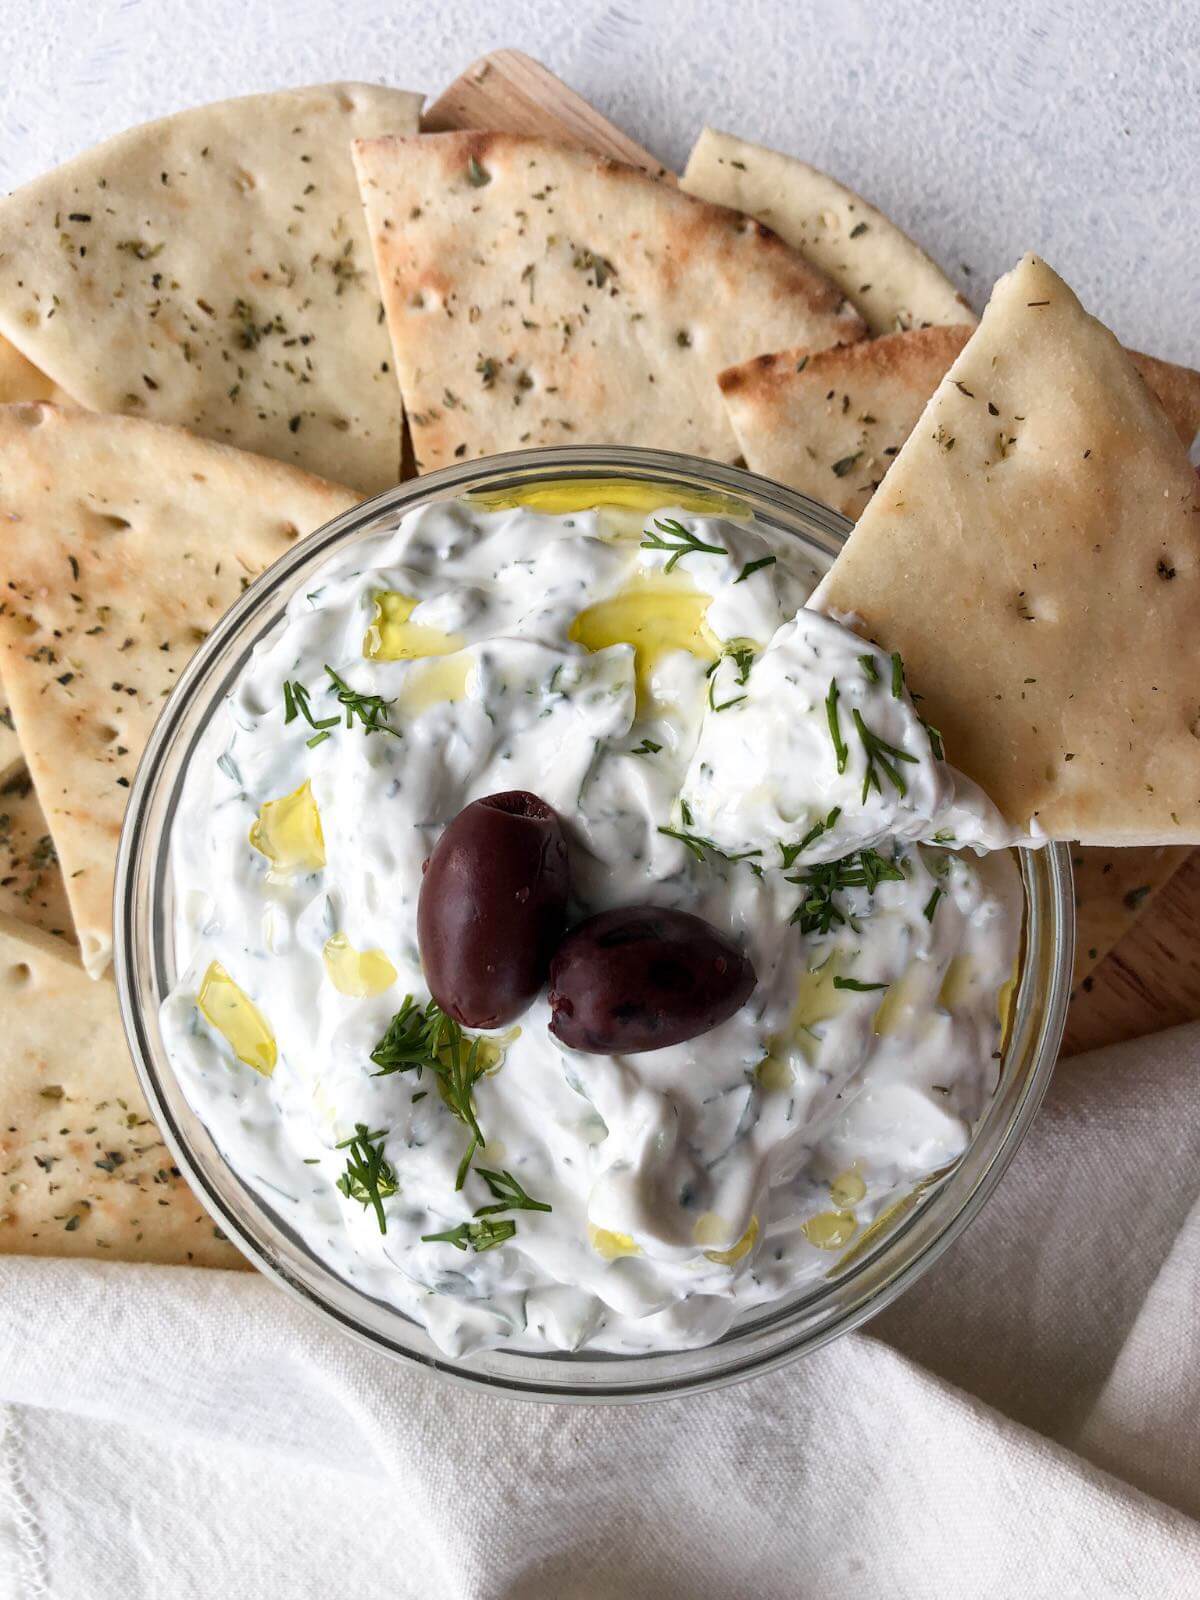 Tzatziki made with sour cream in a bowl with pita bread dipped in.